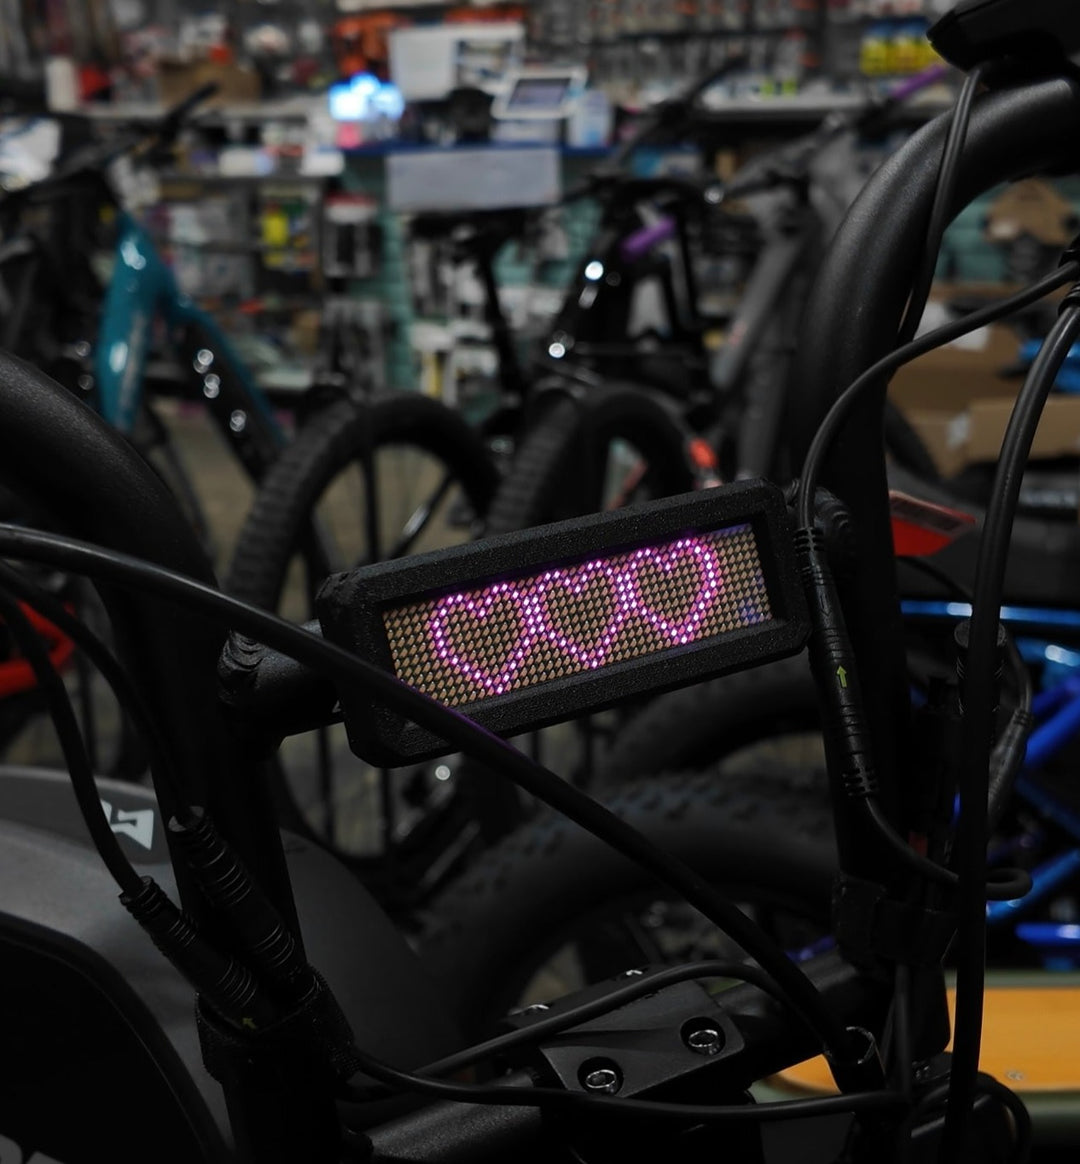 Project 9 Custom Led Panel for your Ebike!